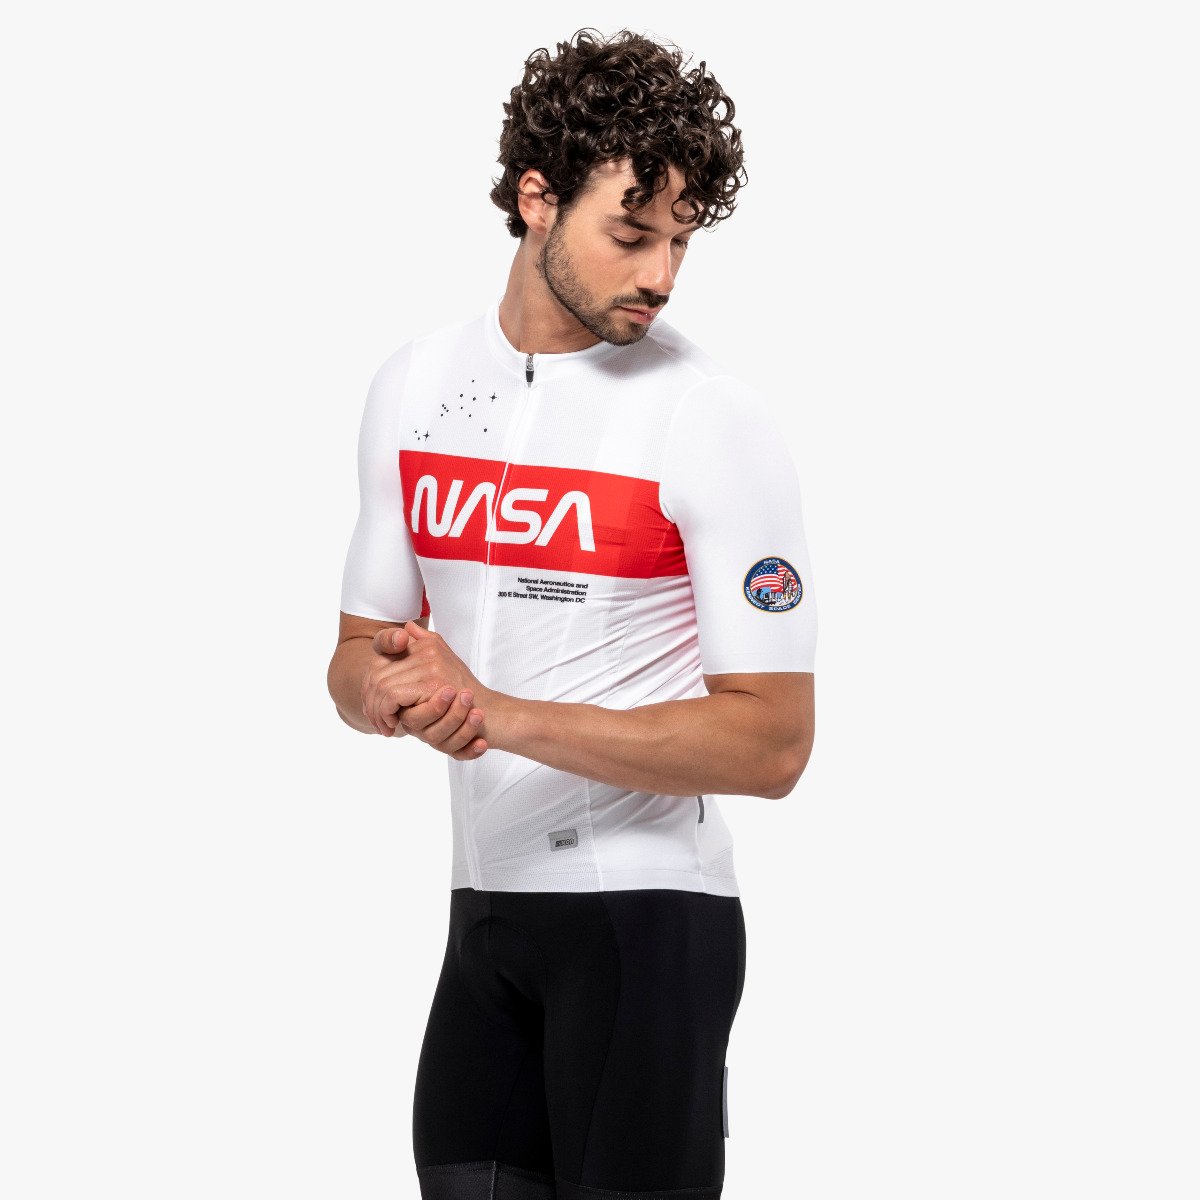 MAILLOT DE CICLISMO X-OVER - SPACE AGENCY 14